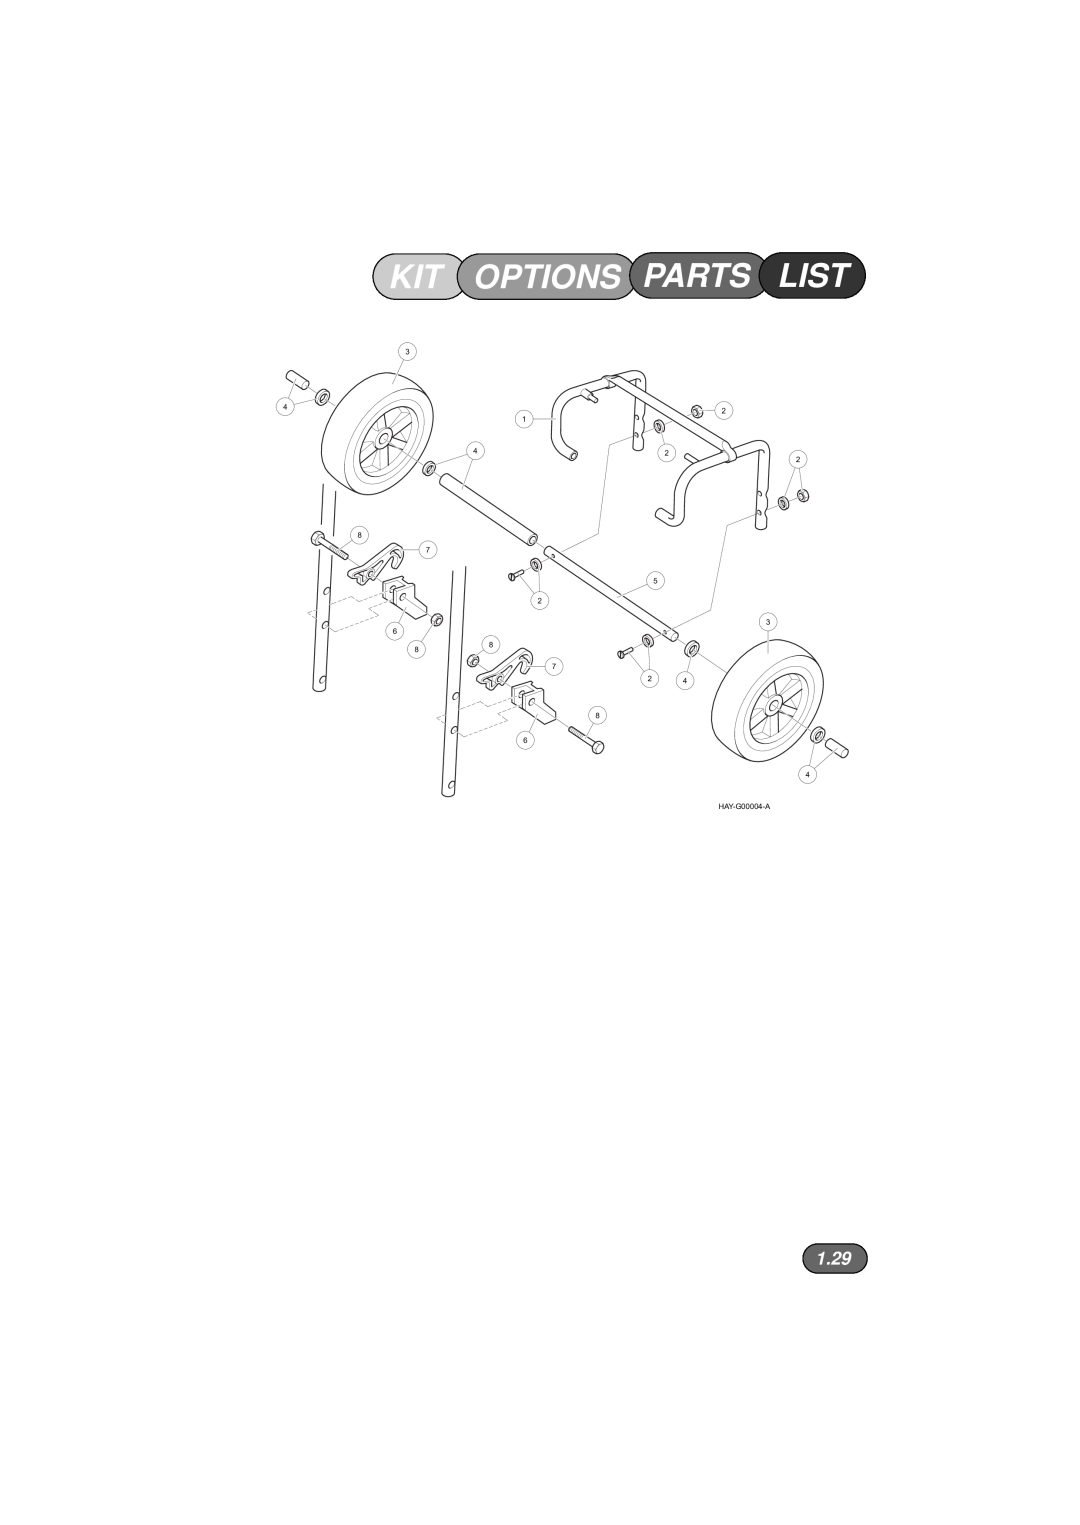 Hayter Mowers 453, 450, 446 Hovertrim manual Kit Options Parts List, 1.29, HAY-G00004-A 